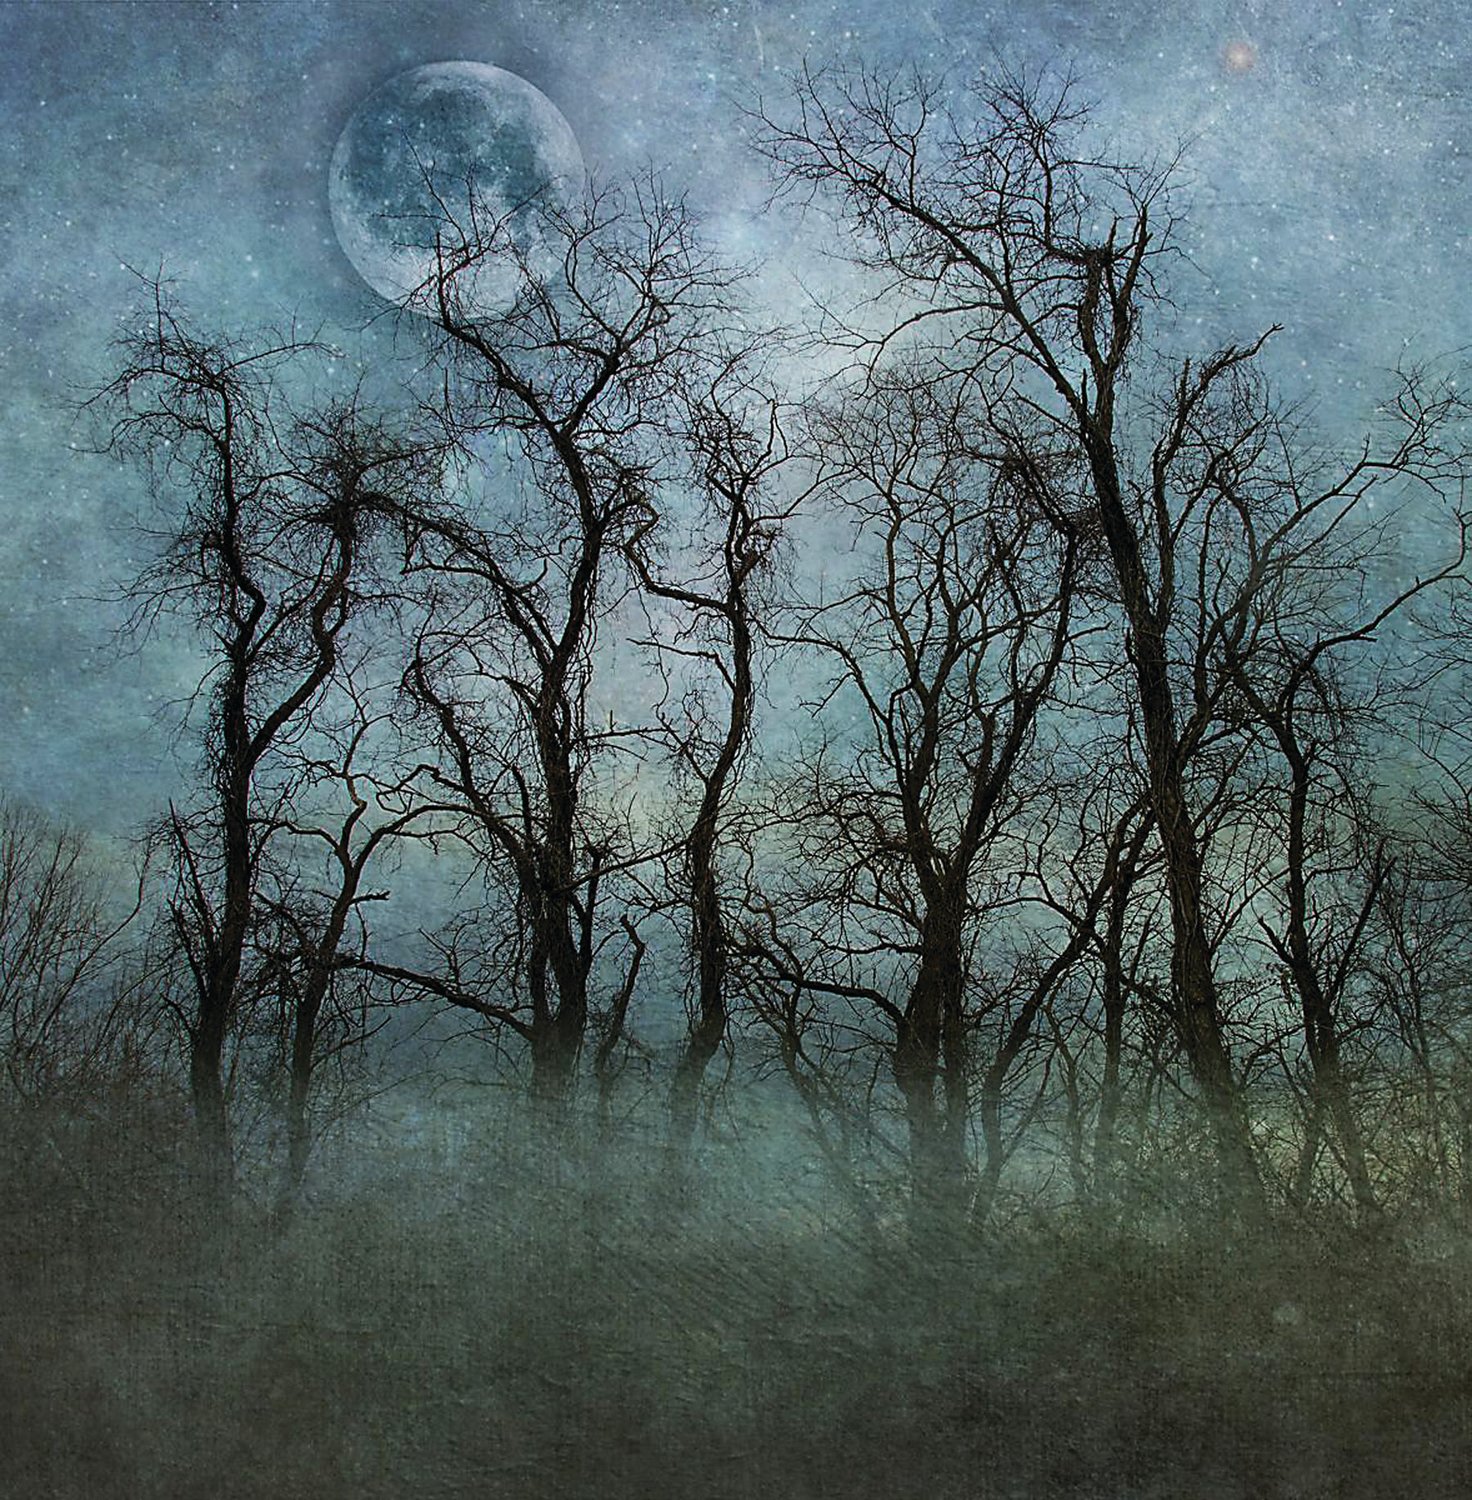 “Moondancing” is a photograph by Nancy Hellmuth, which last year, was paired with “Poem Beginning With Lines From Rumi” by Amy Small-McKinney. Both works explore ideas of darkness and light.